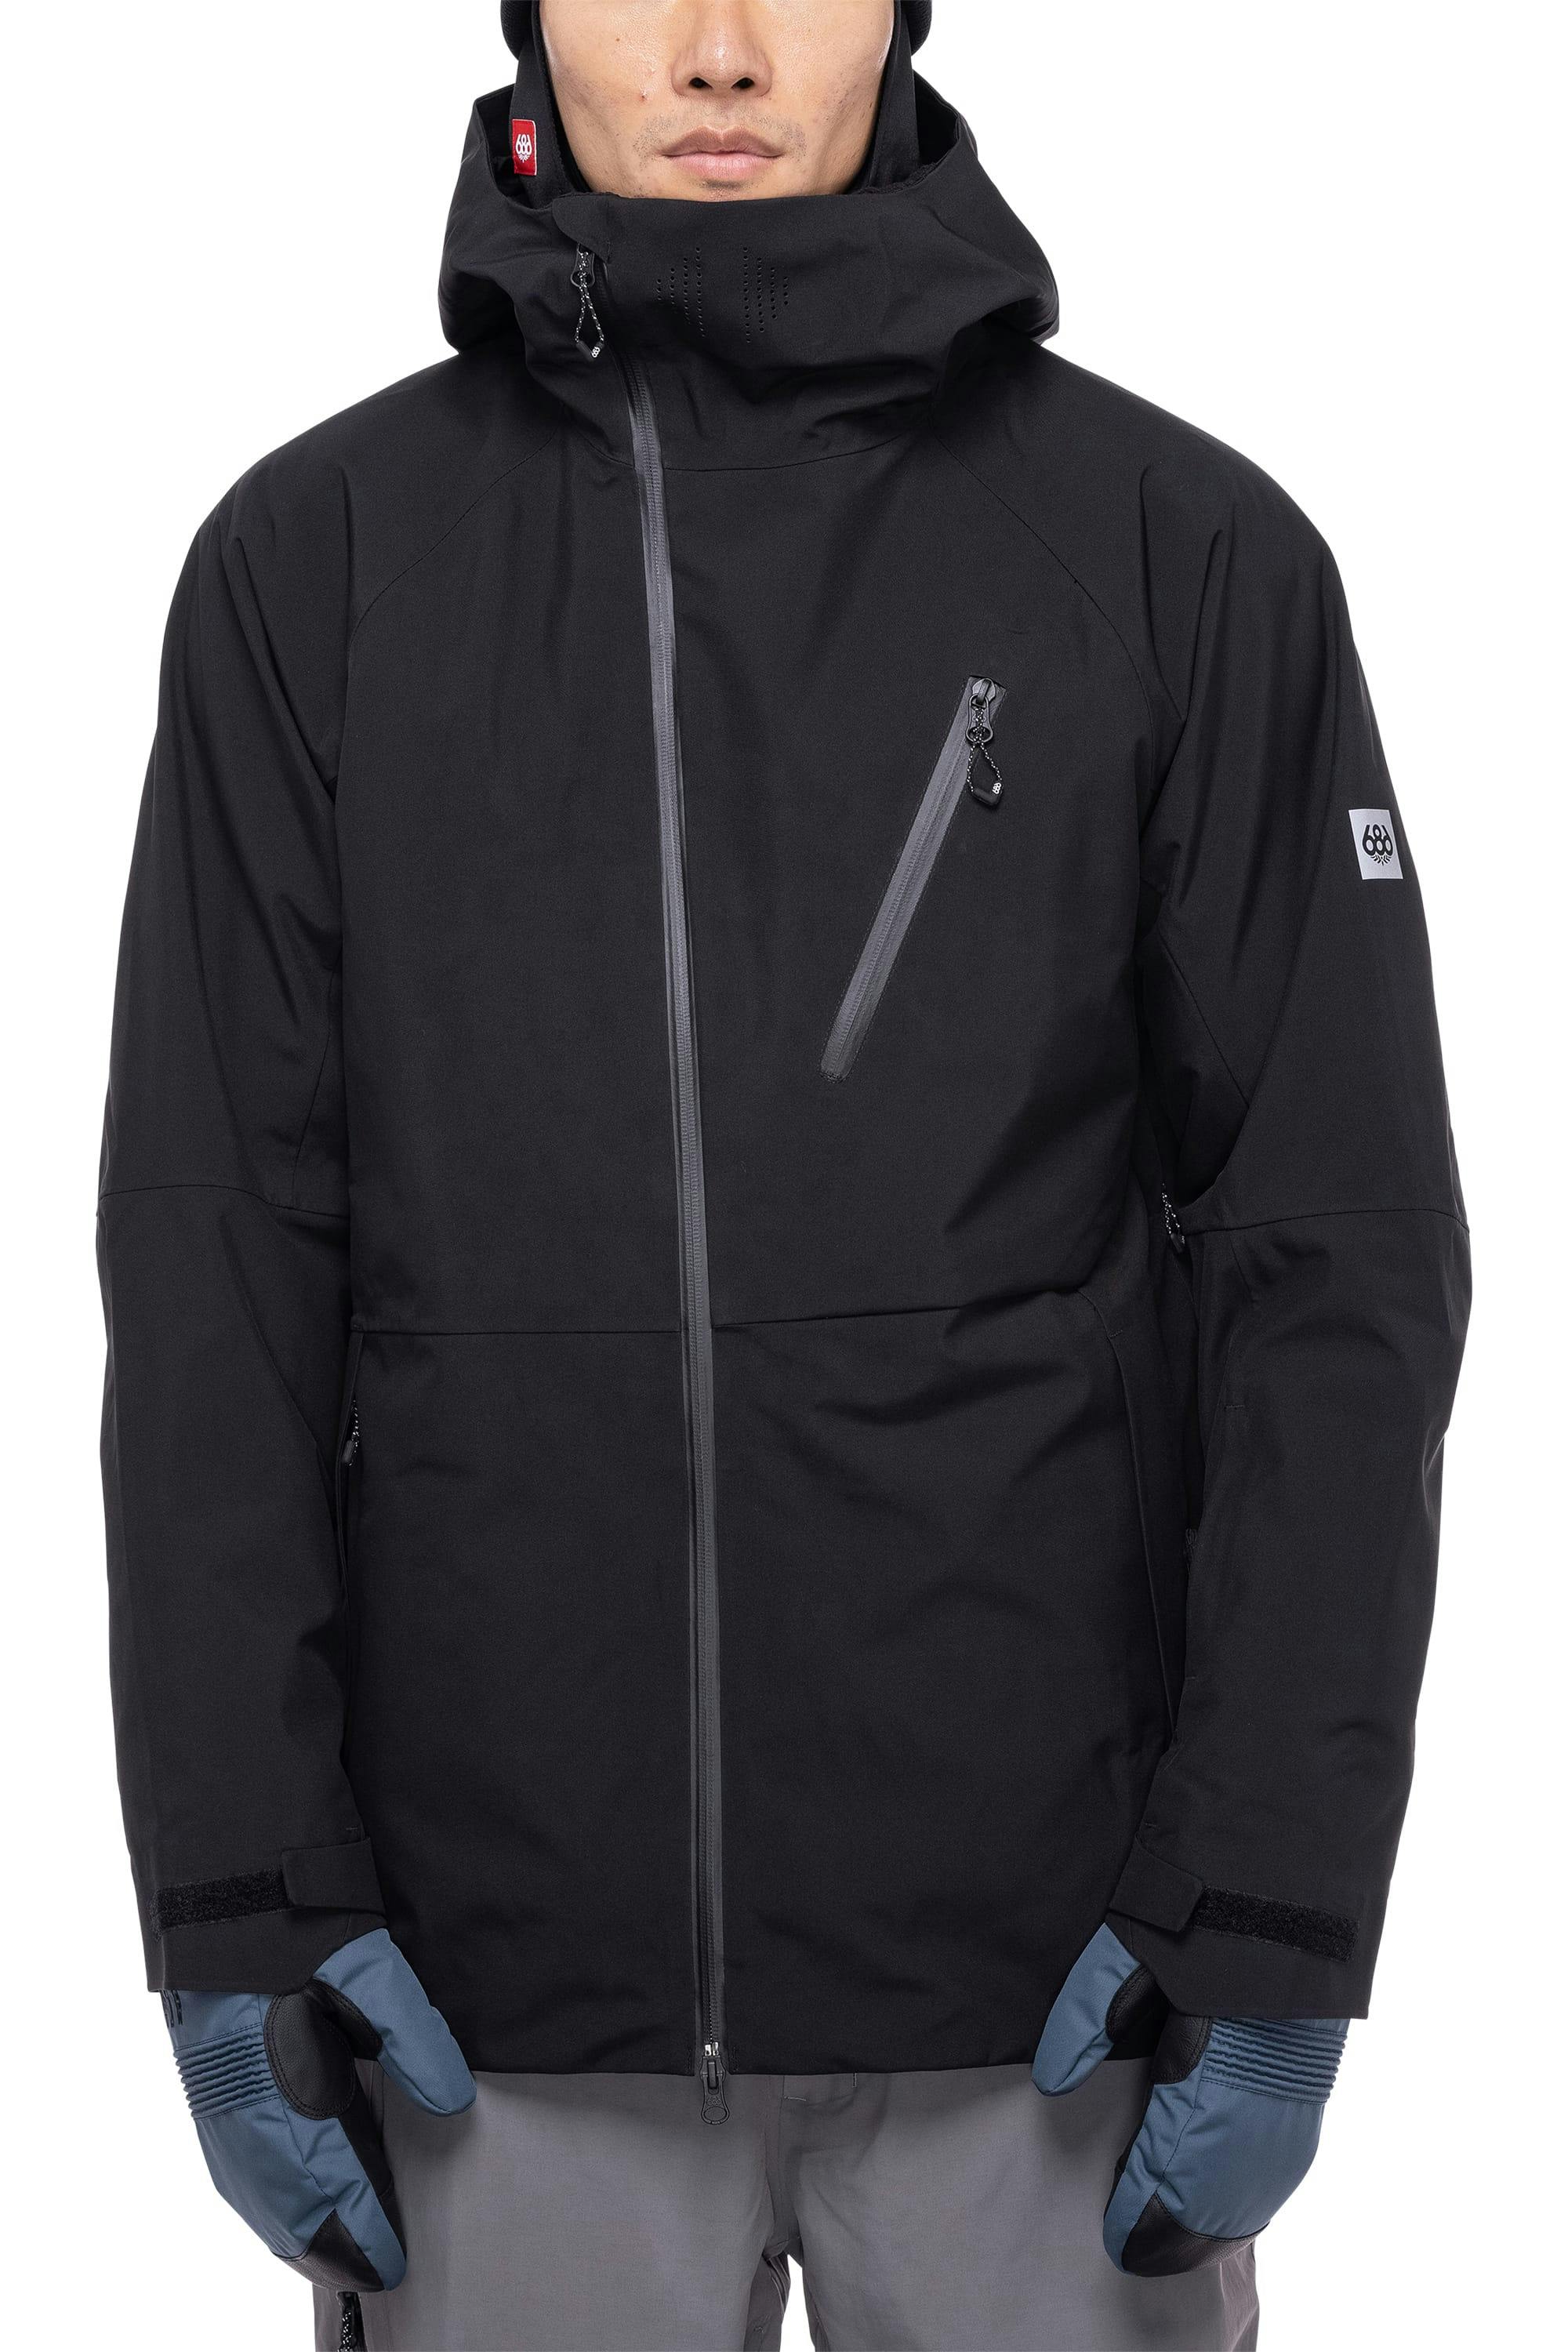 686 Men's Hydra Thermagraph Jacket